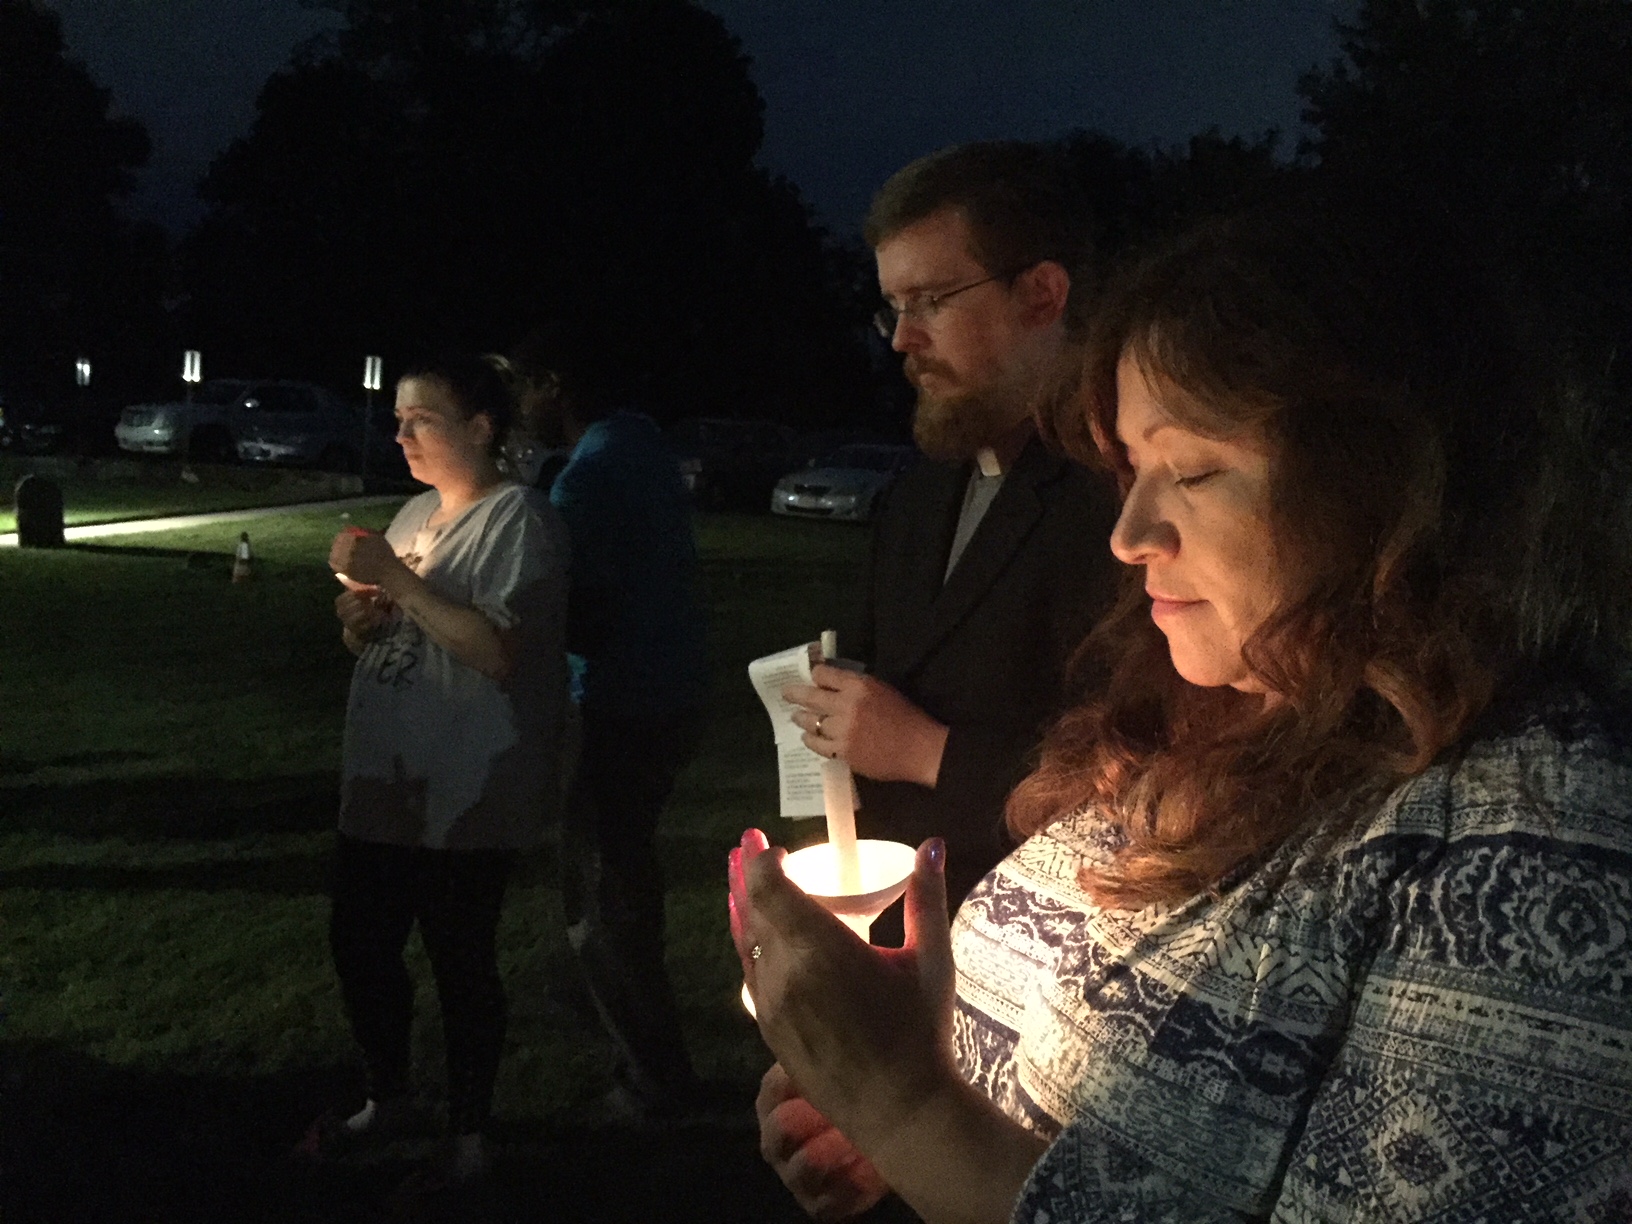 Linda Midwig, far right, stands with the Rev. Mark Gorman during a prayer vigil Sept. 28 at Cranberry UMC in Perryman. Photo by Erik Alsgaard.